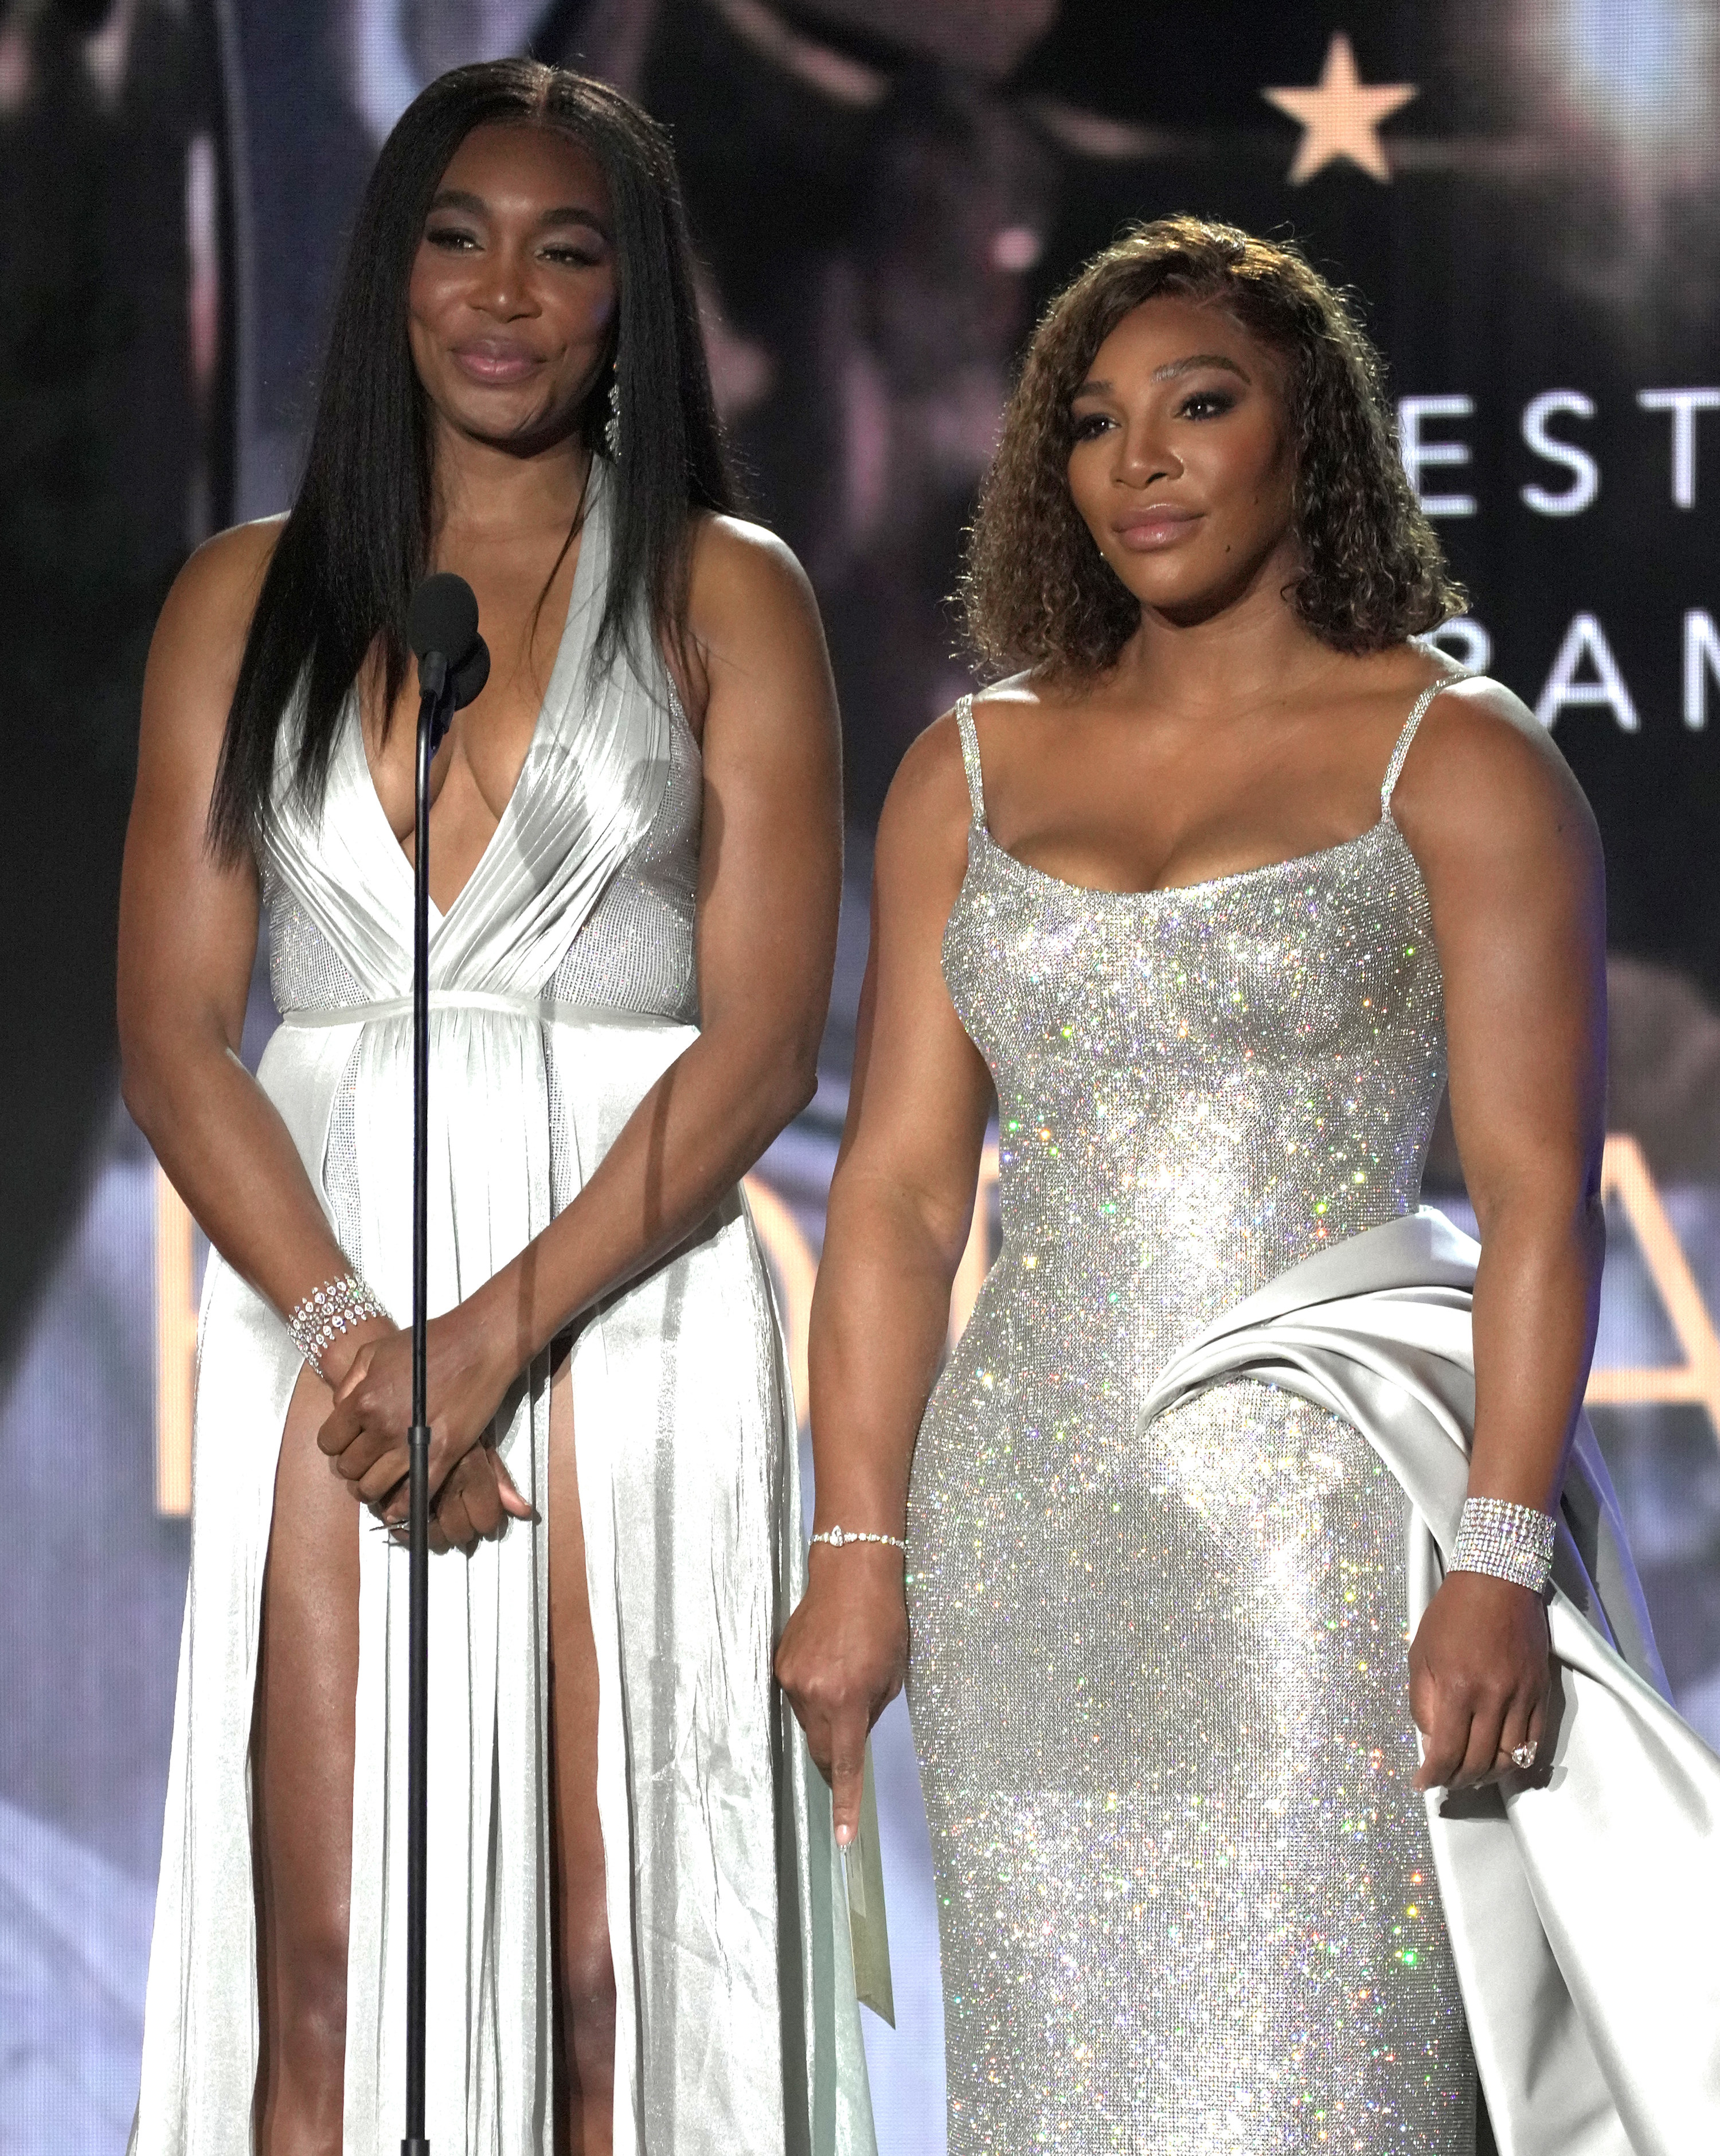 Serena and Venus stand in front of a microphone